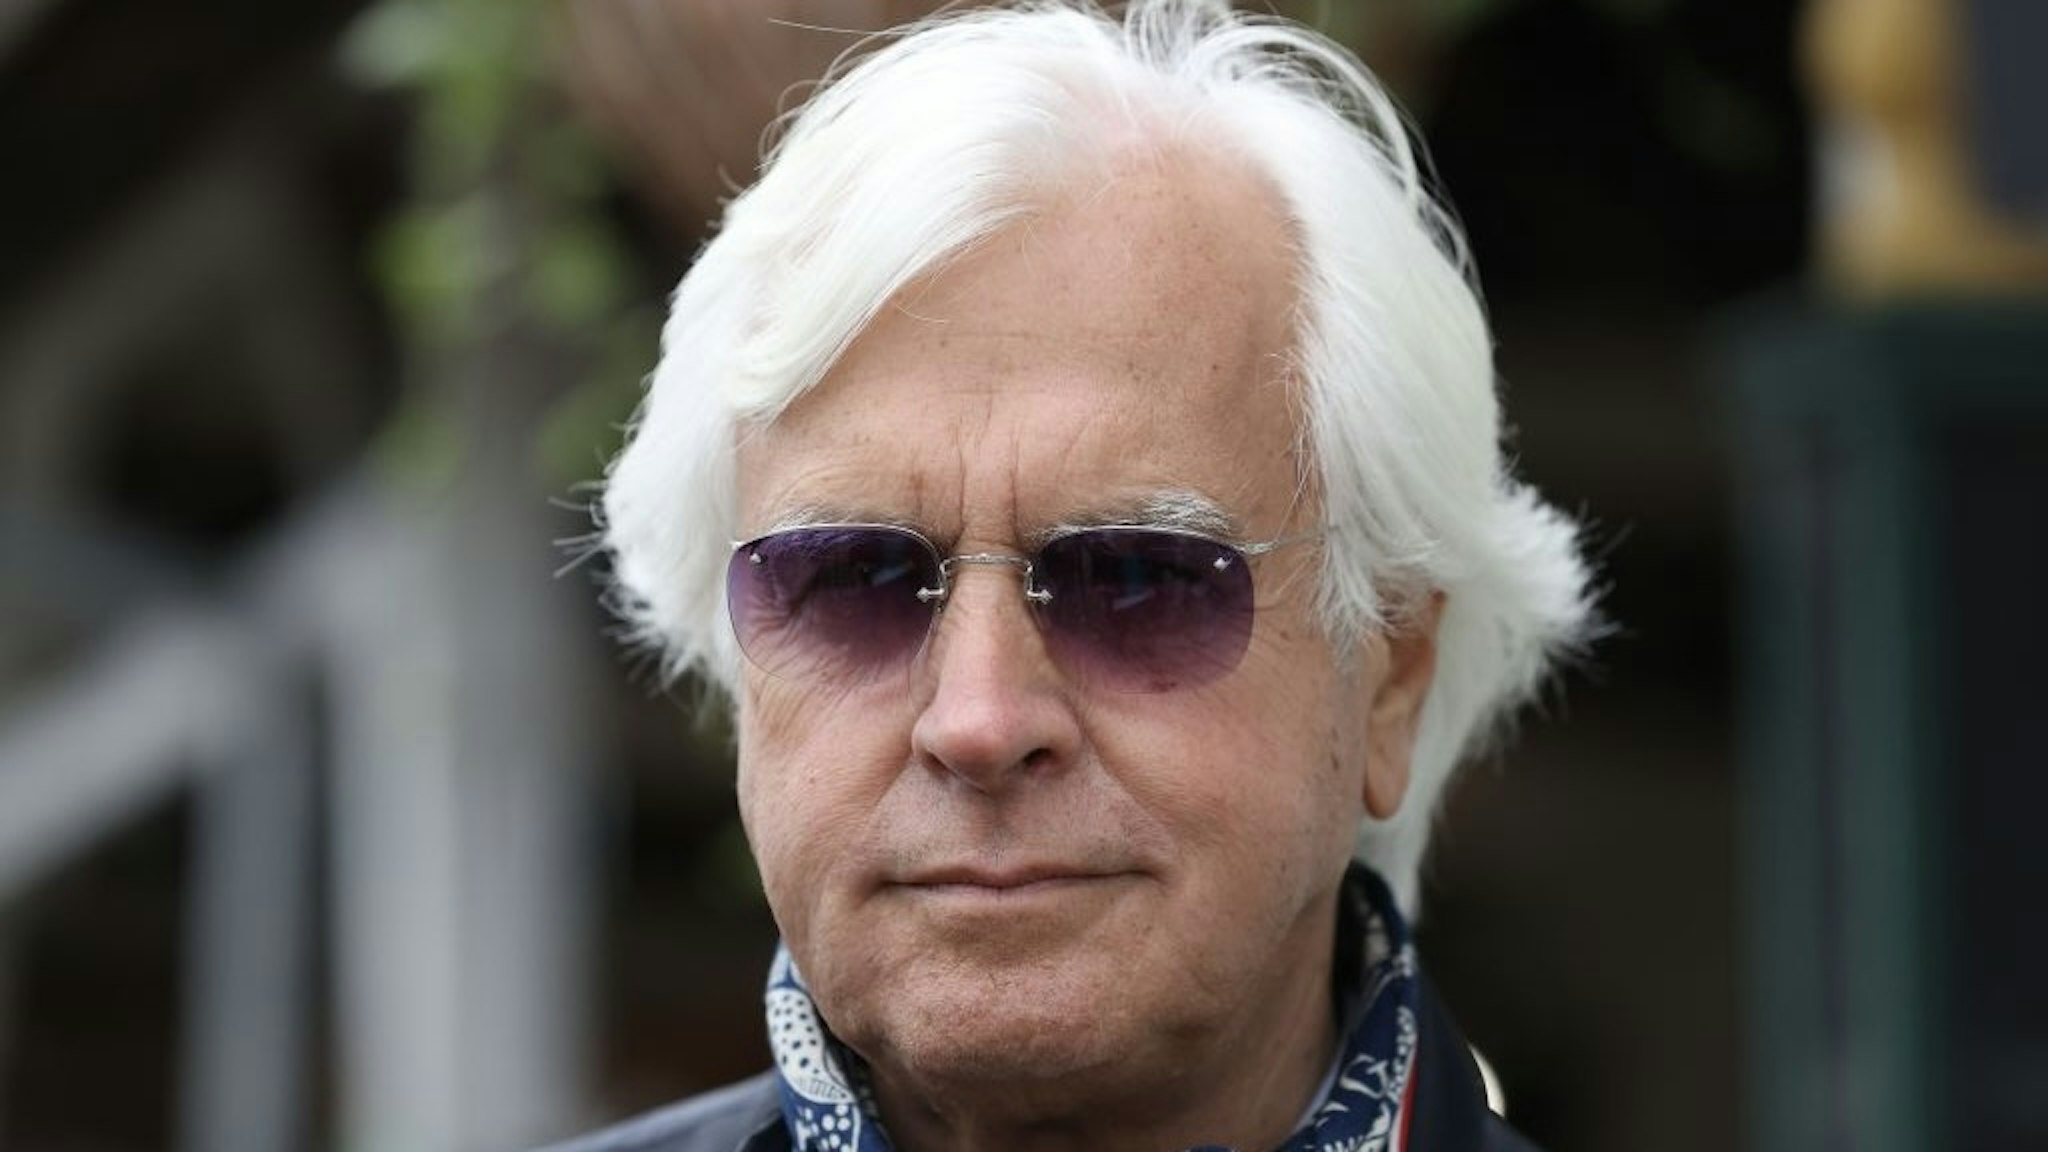 LOUISVILLE, KENTUCKY - APRIL 29: Bob Baffert the trainer of Medina Spirit talks to the media during the training for the Kentucky Derby at Churchill Downs on April 29, 2021 in Louisville, Kentucky. (Photo by Andy Lyons/Getty Images)